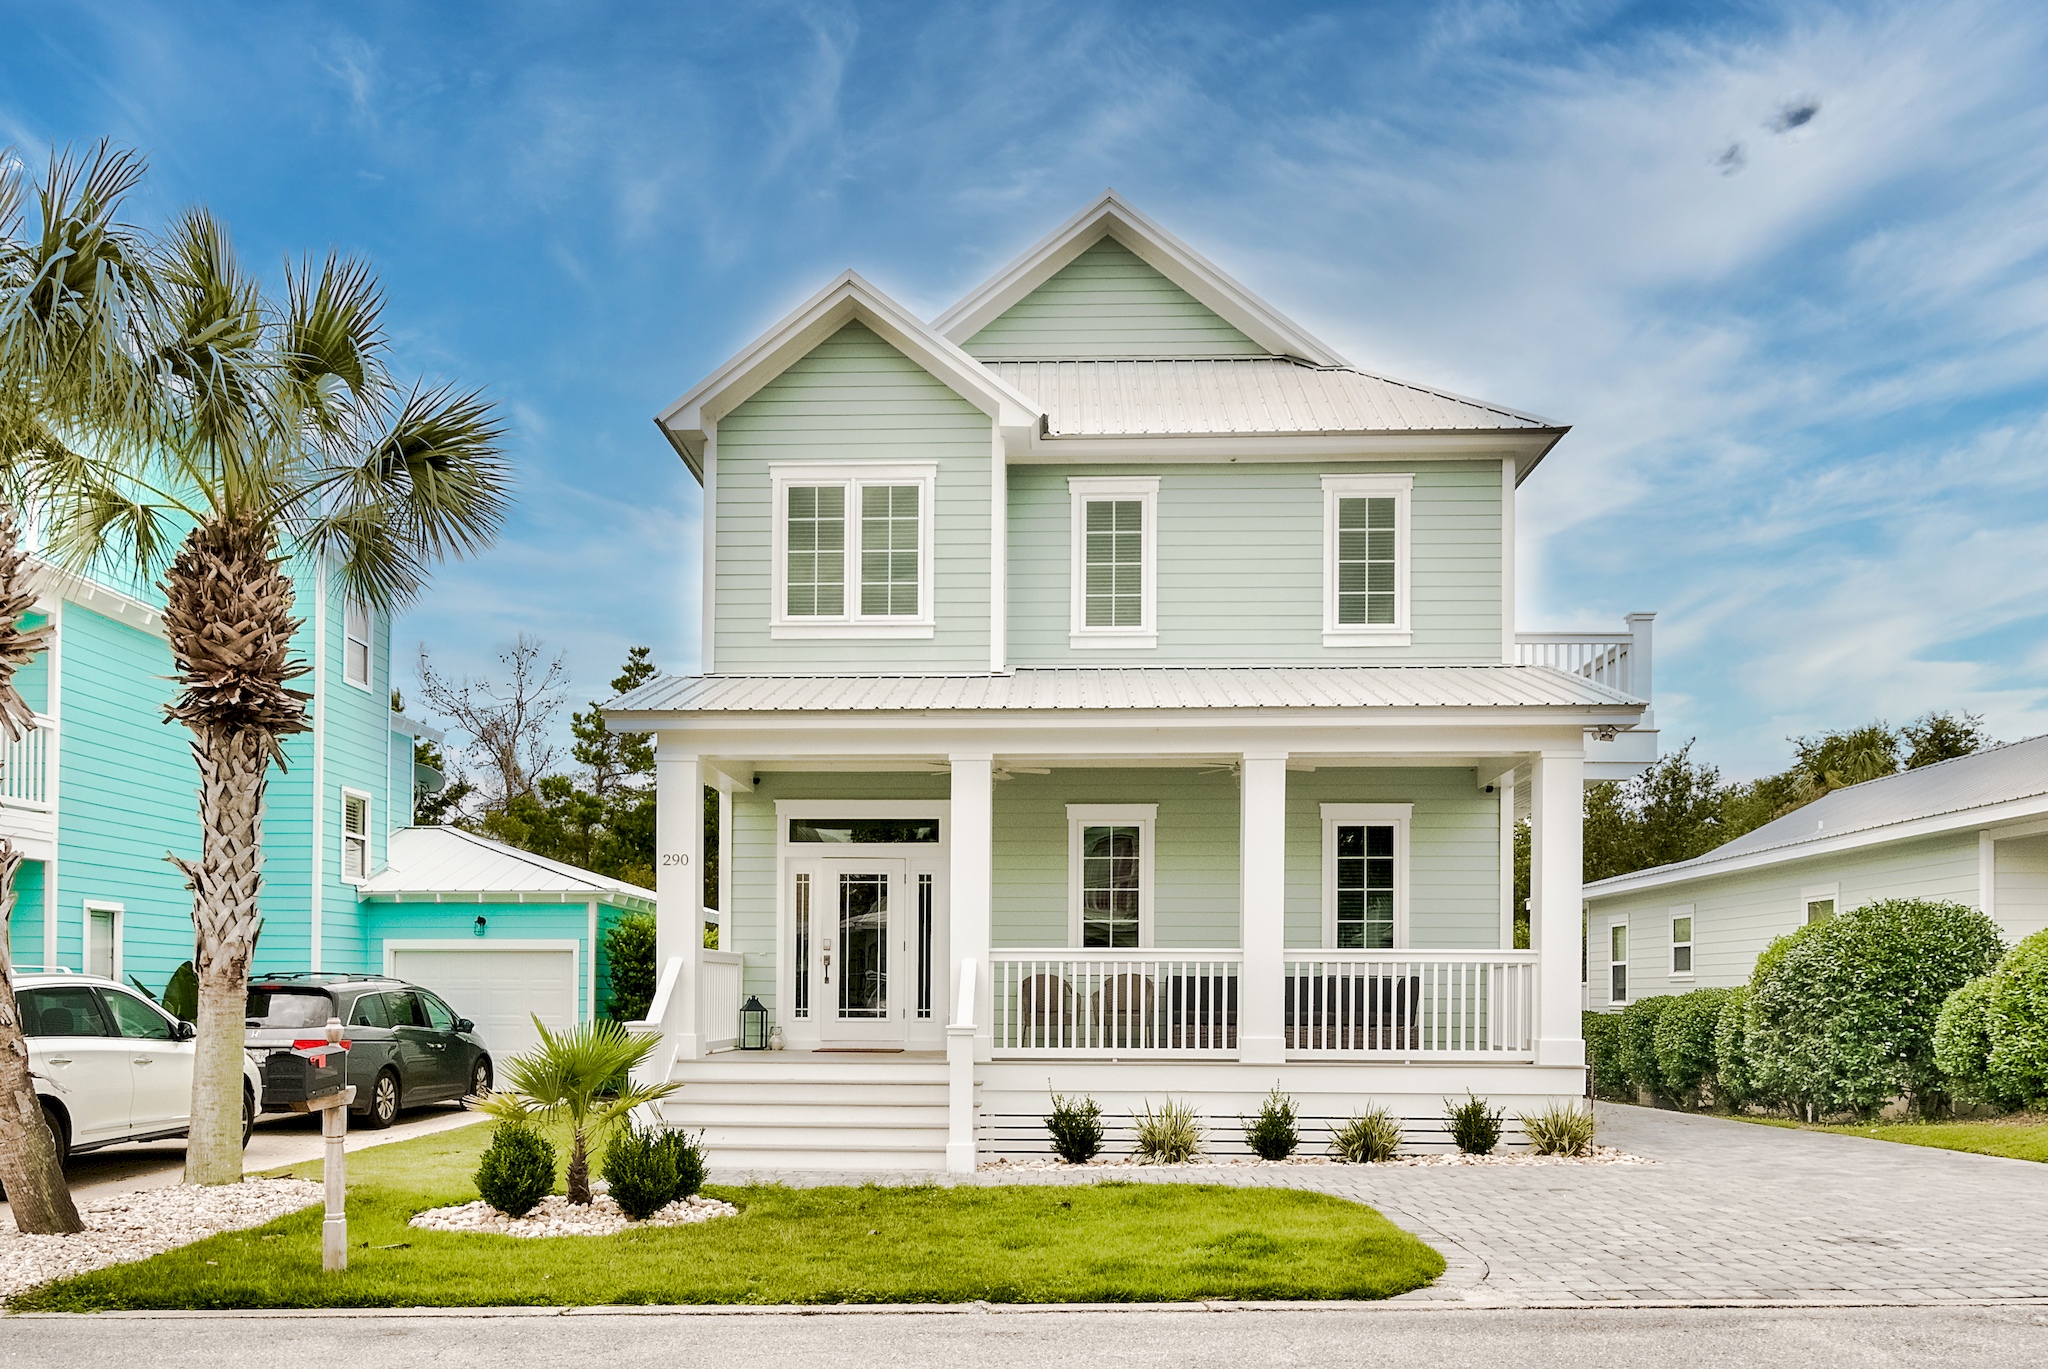 VayKshun House House / Cottage rental in 30a Beach House Rentals in Highway 30-A Florida - #3